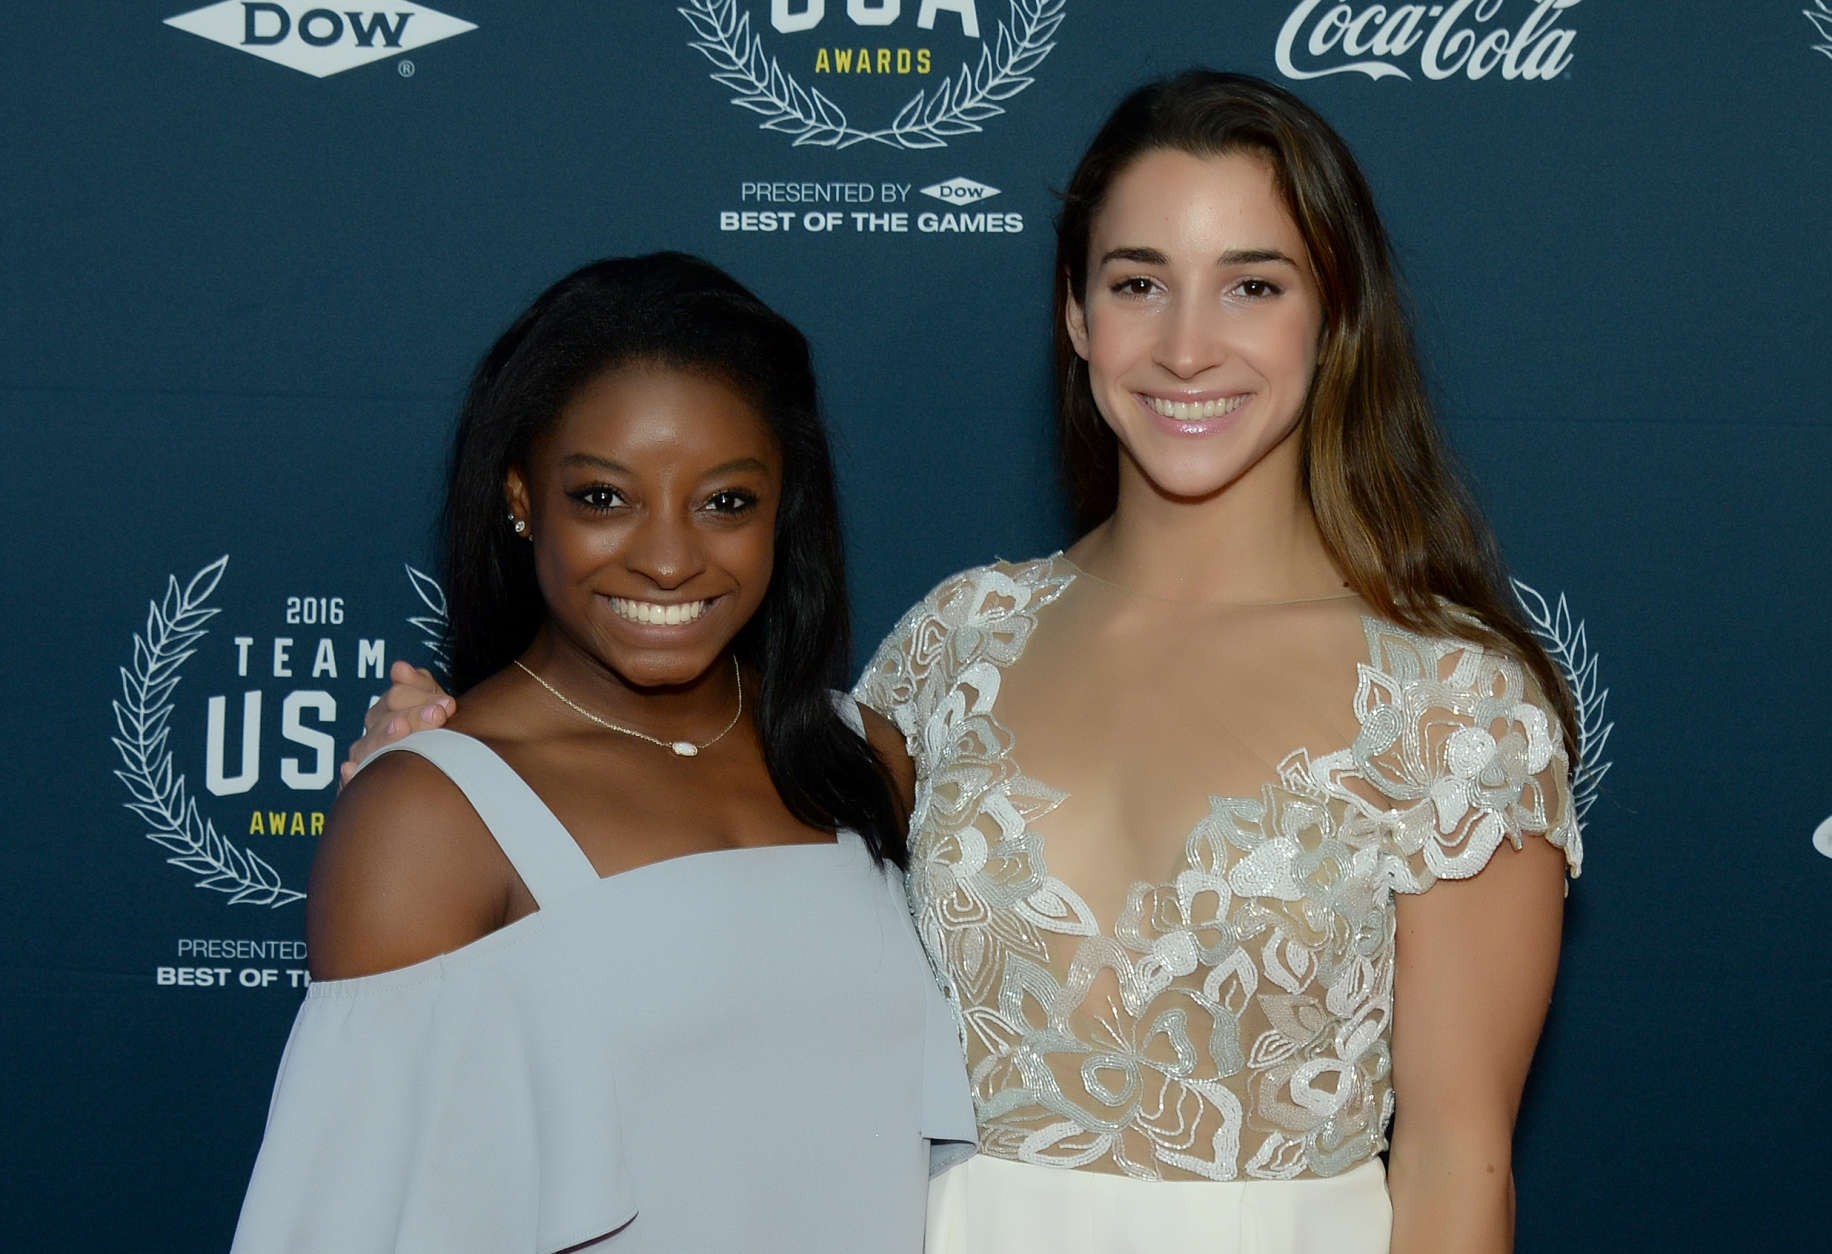 Gymnasts Simone Biles and Aly Raisman on the red carpet. (Courtesy Shannon Finney, <a href="http://www.shannonfinneyphotography.com">www.shannonfinneyphotography.com</a>)